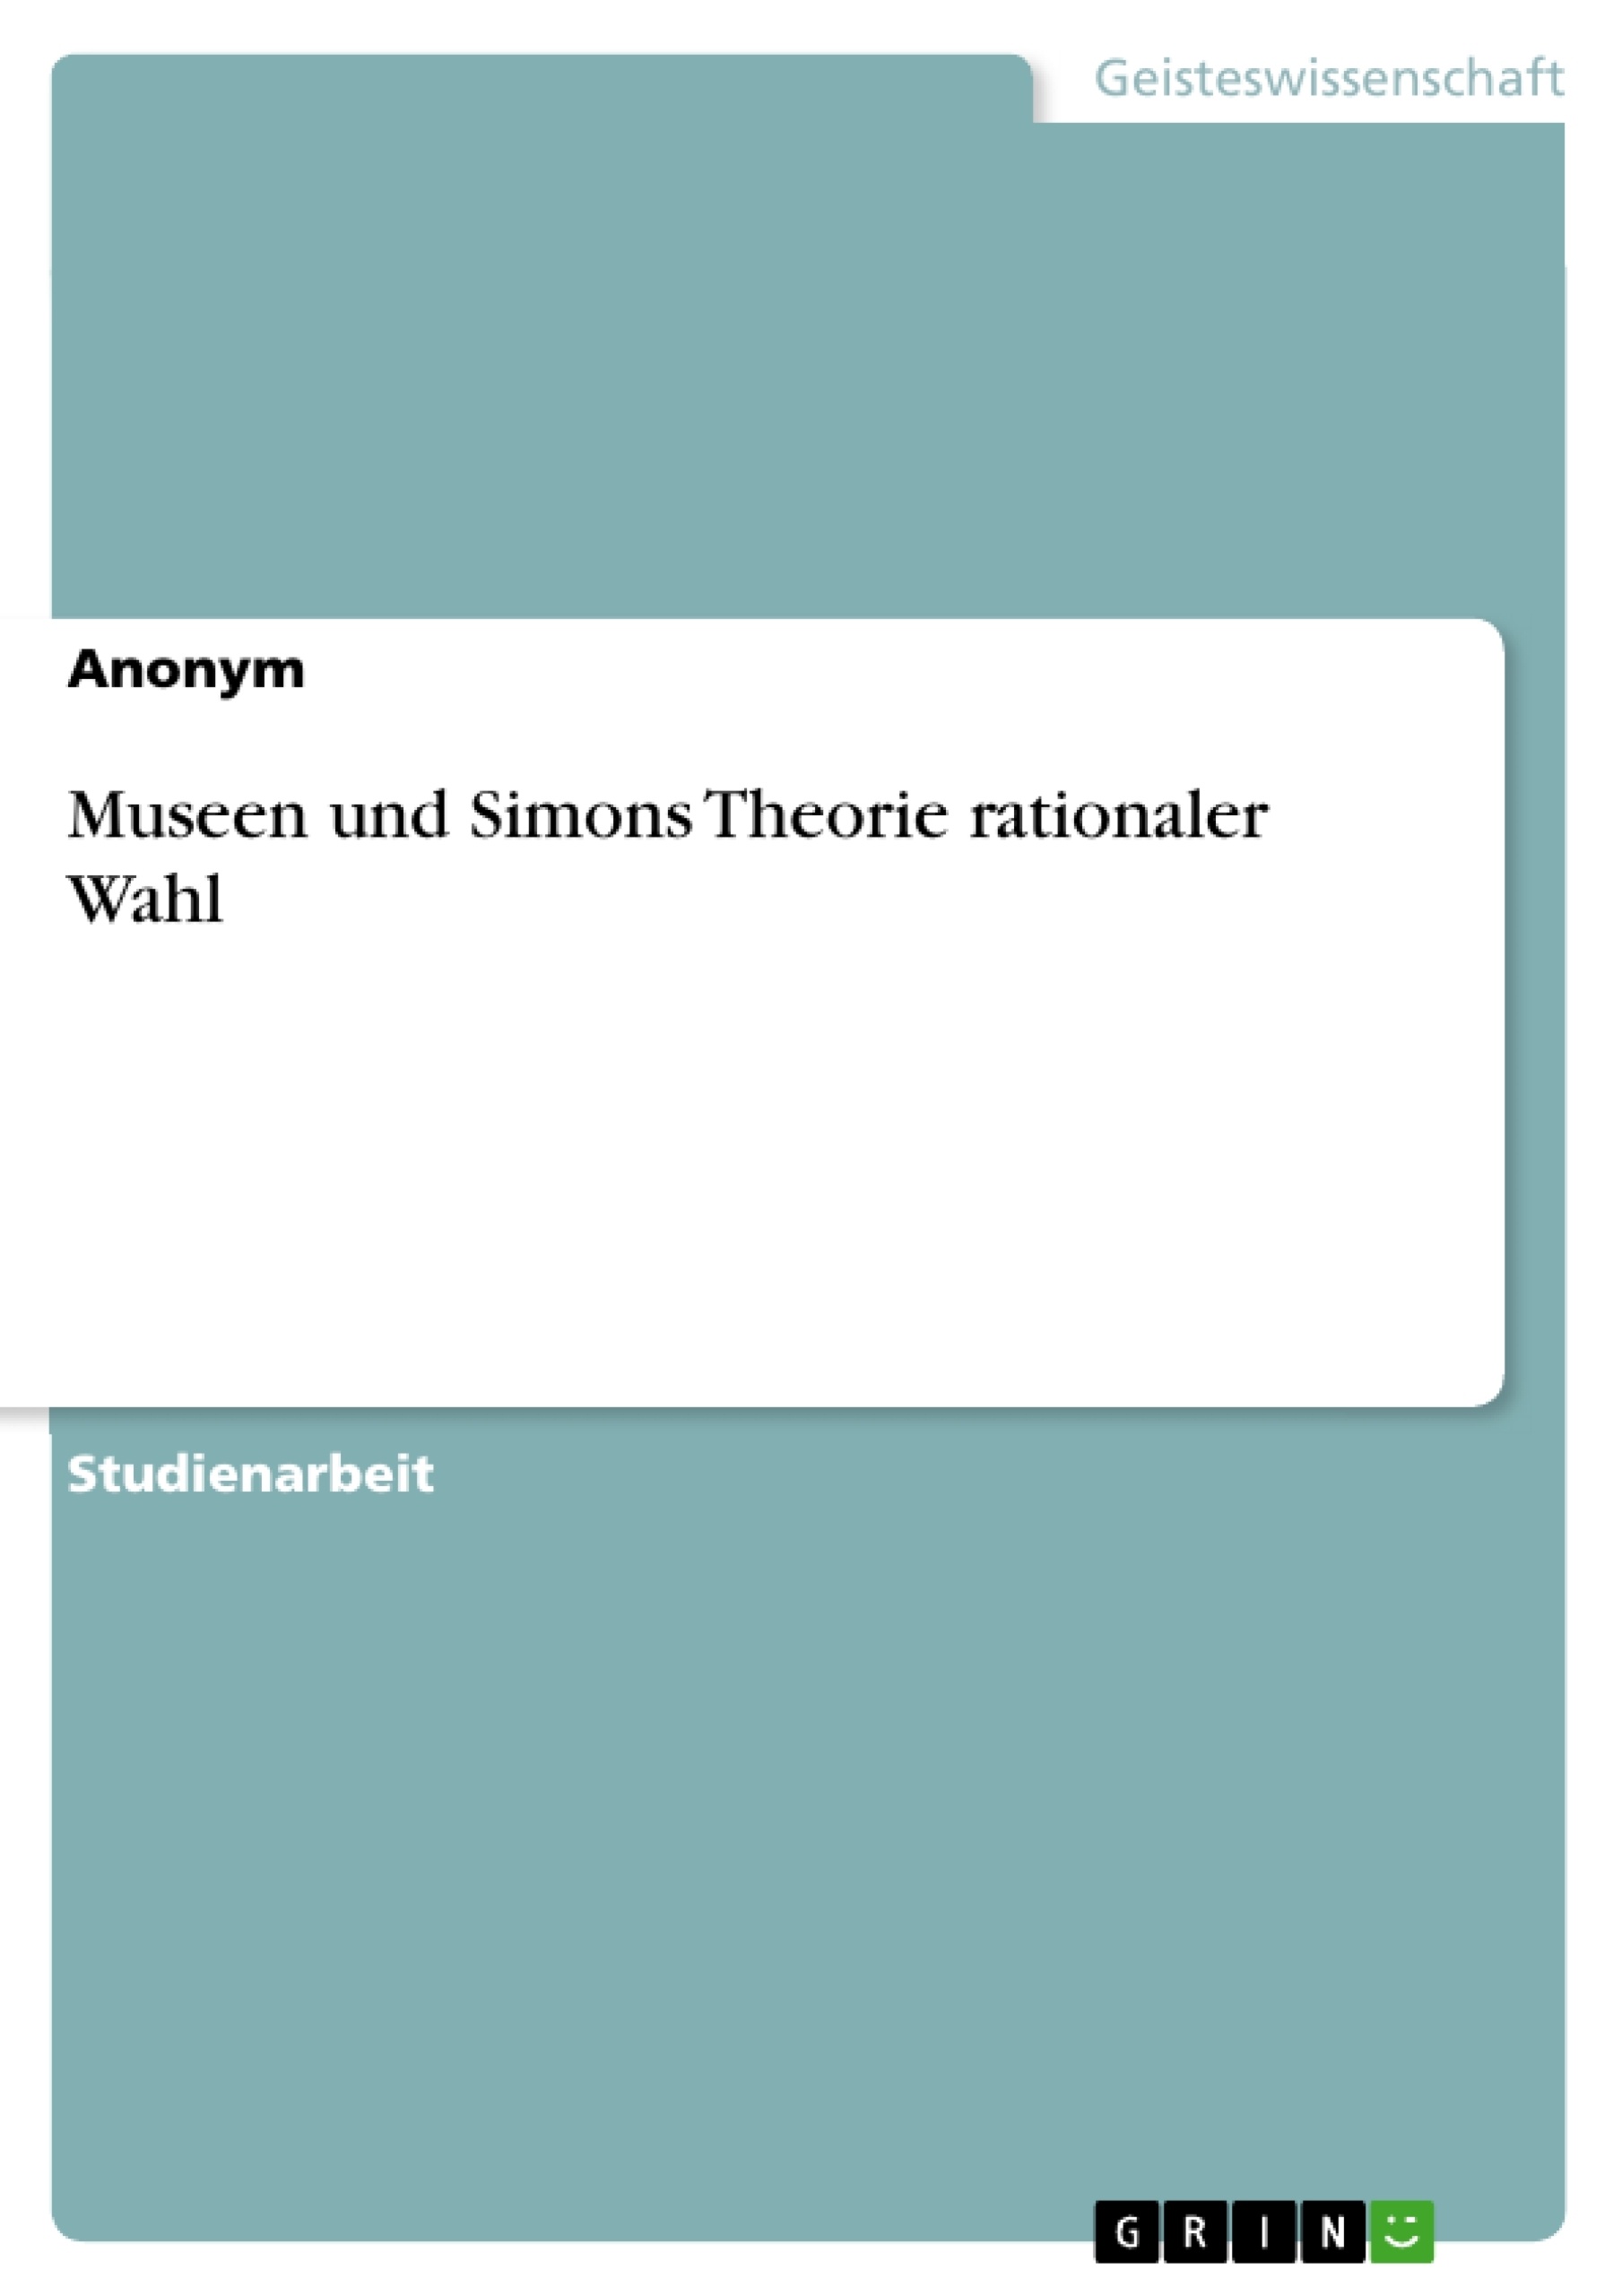 Título: Museen und Simons Theorie rationaler Wahl